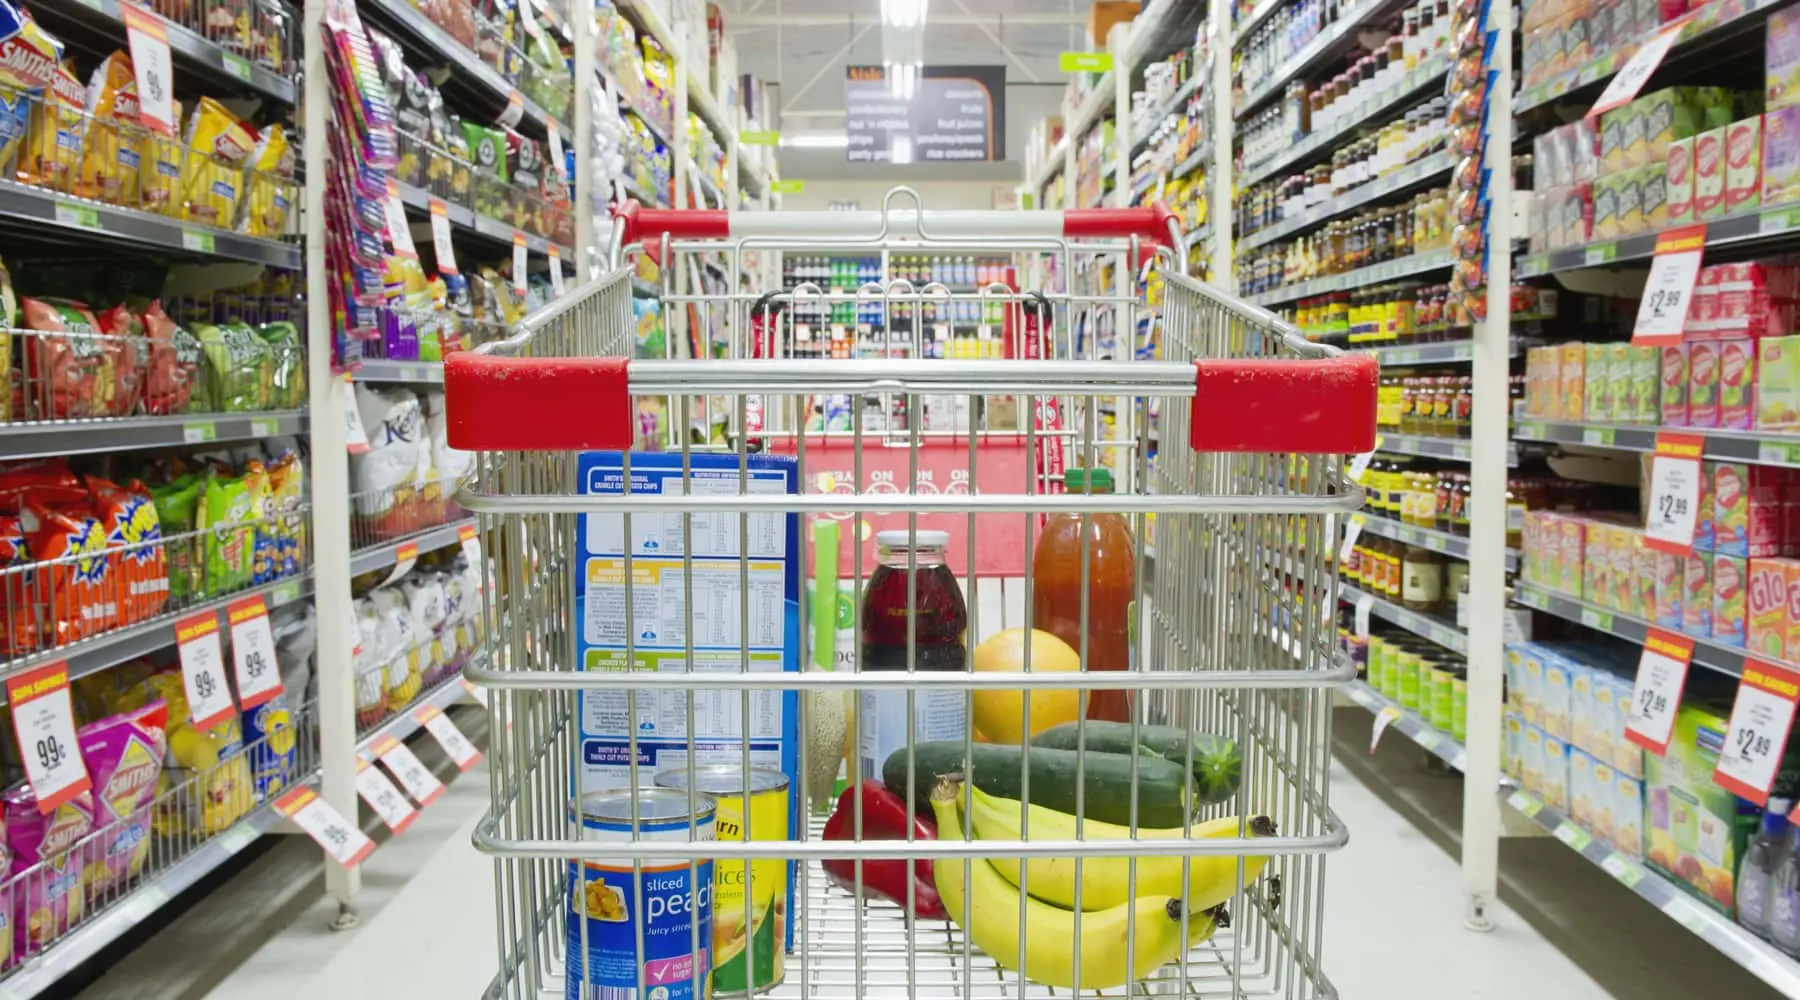 Grocery trolley full of items in a grocery store isle. 